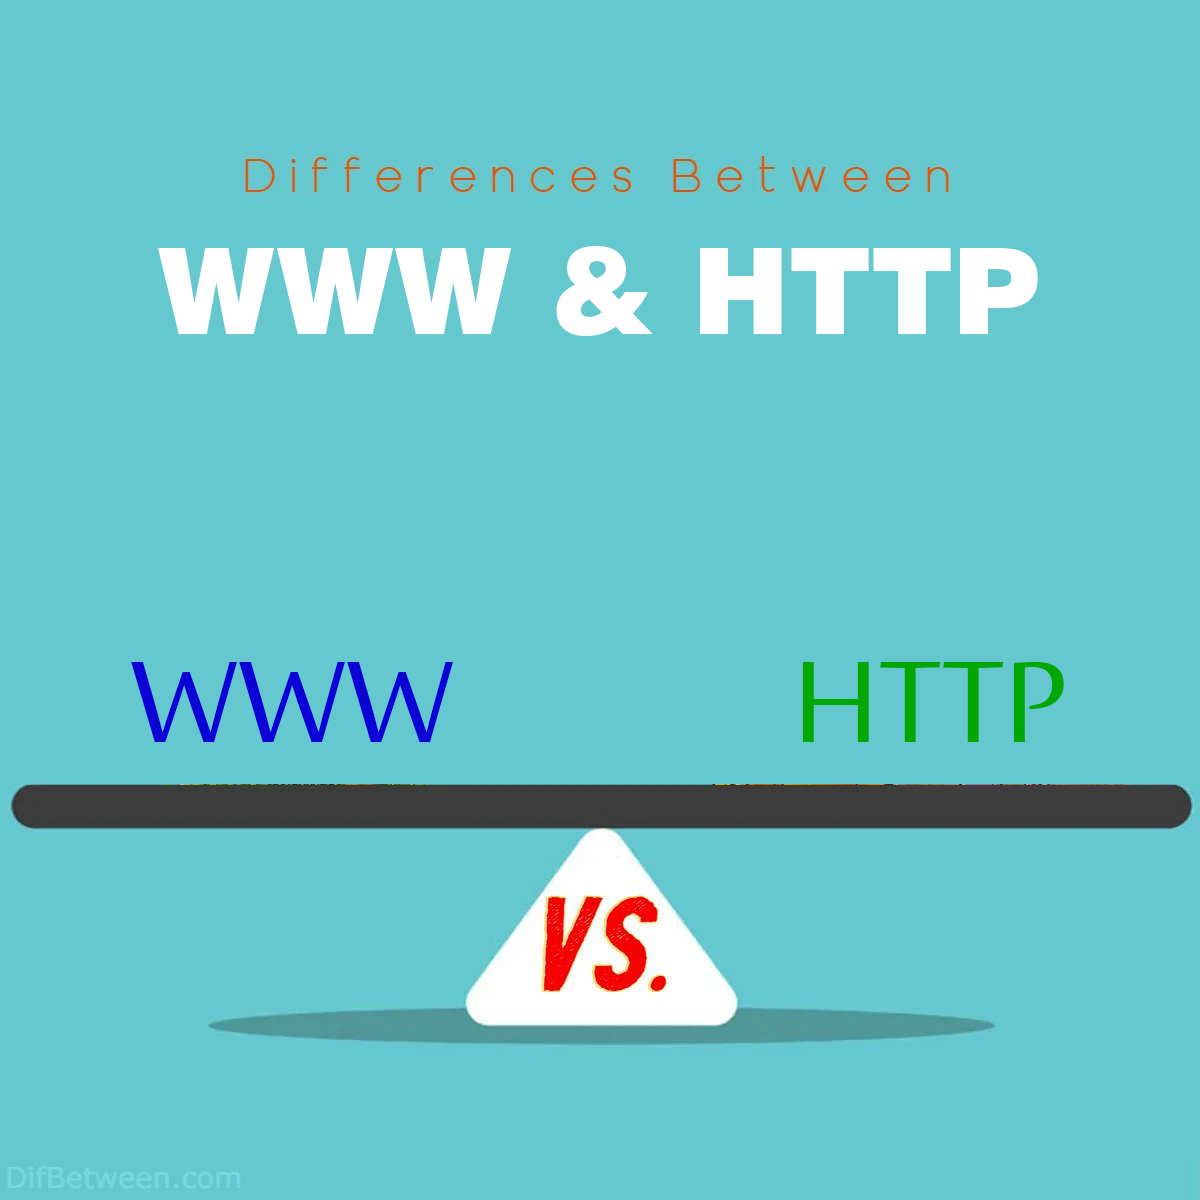 Key Differences Between WWW and HTTP